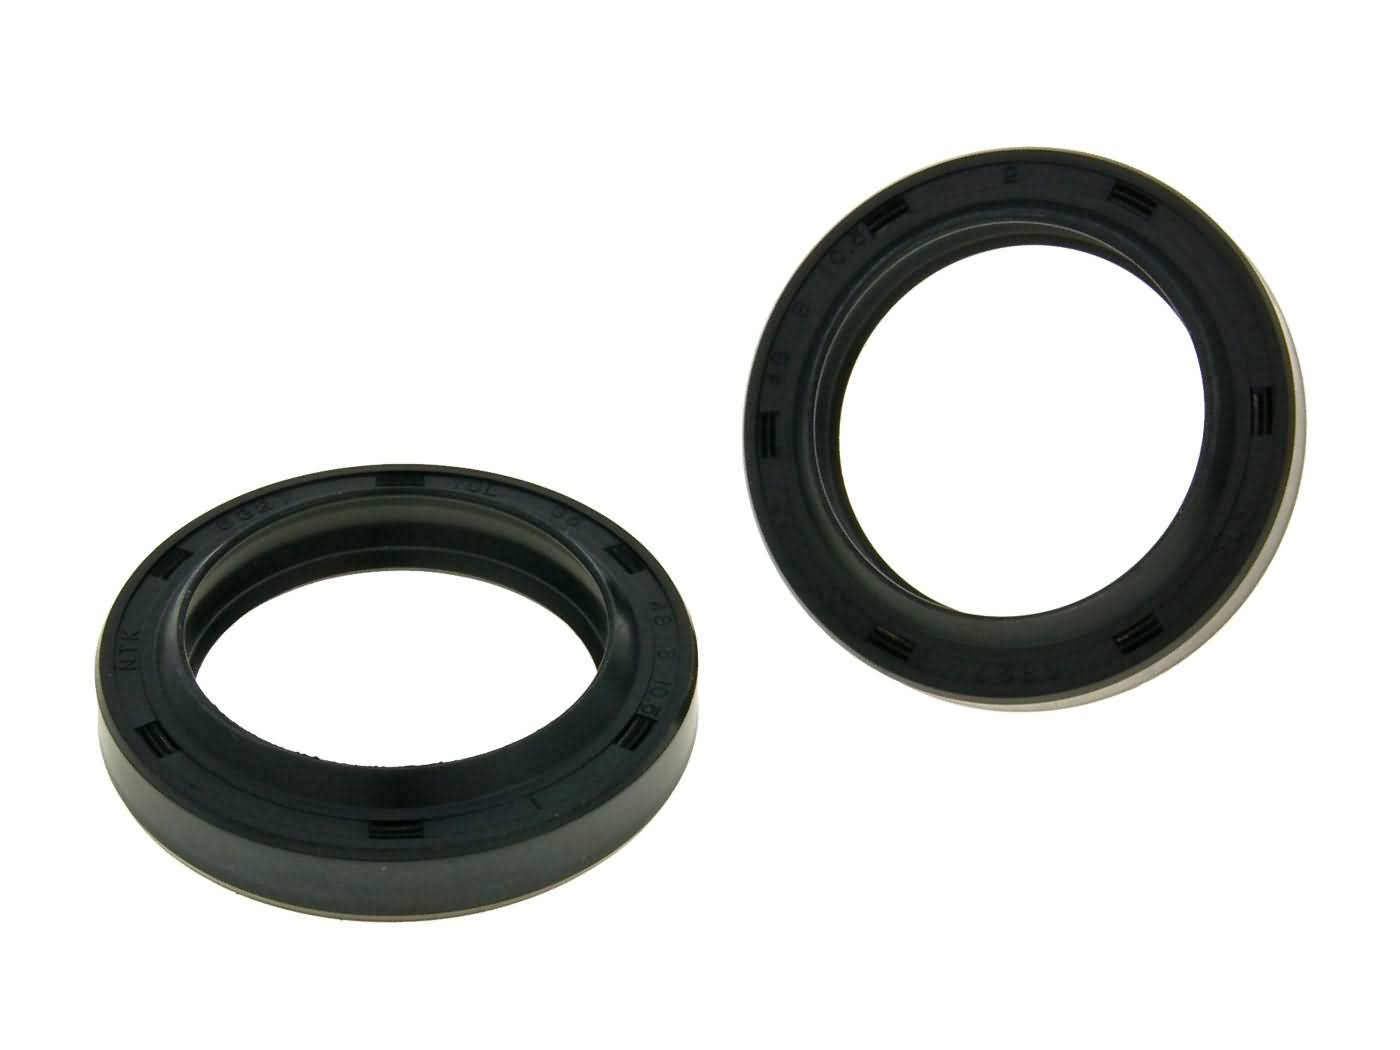 ATHENA Fork Oil Seals 32x42x7 mm Para KTM Scooters 